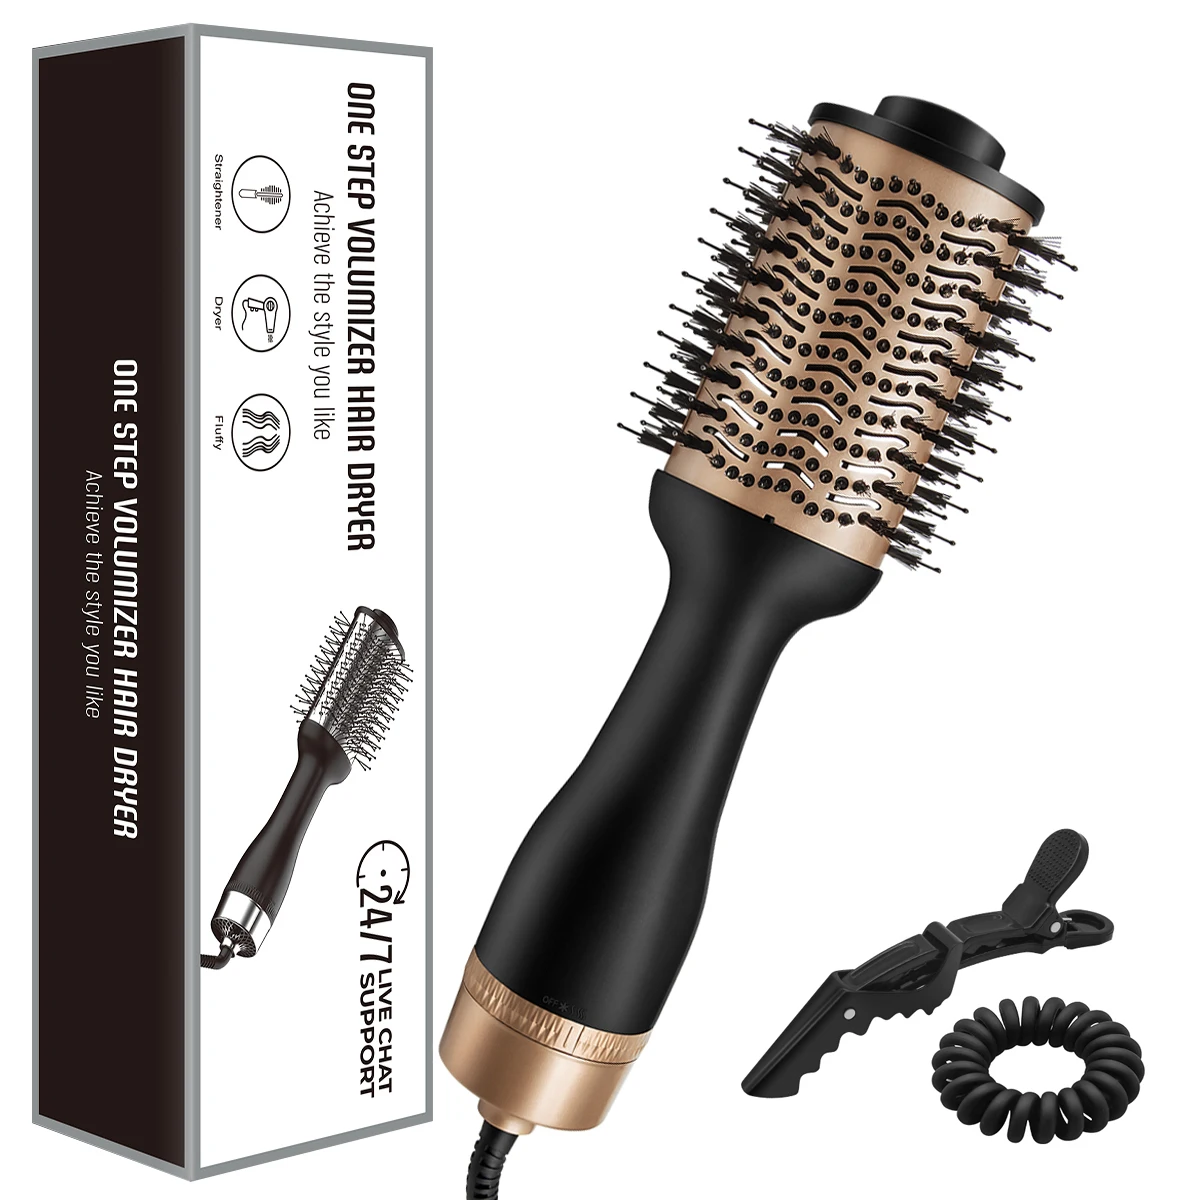 

One tep hair dryer brush/1200W blow dryer brush/Negative ion dryer Roller comb/5 in 1 volumizer brush,2 Pieces, Gold/oem color